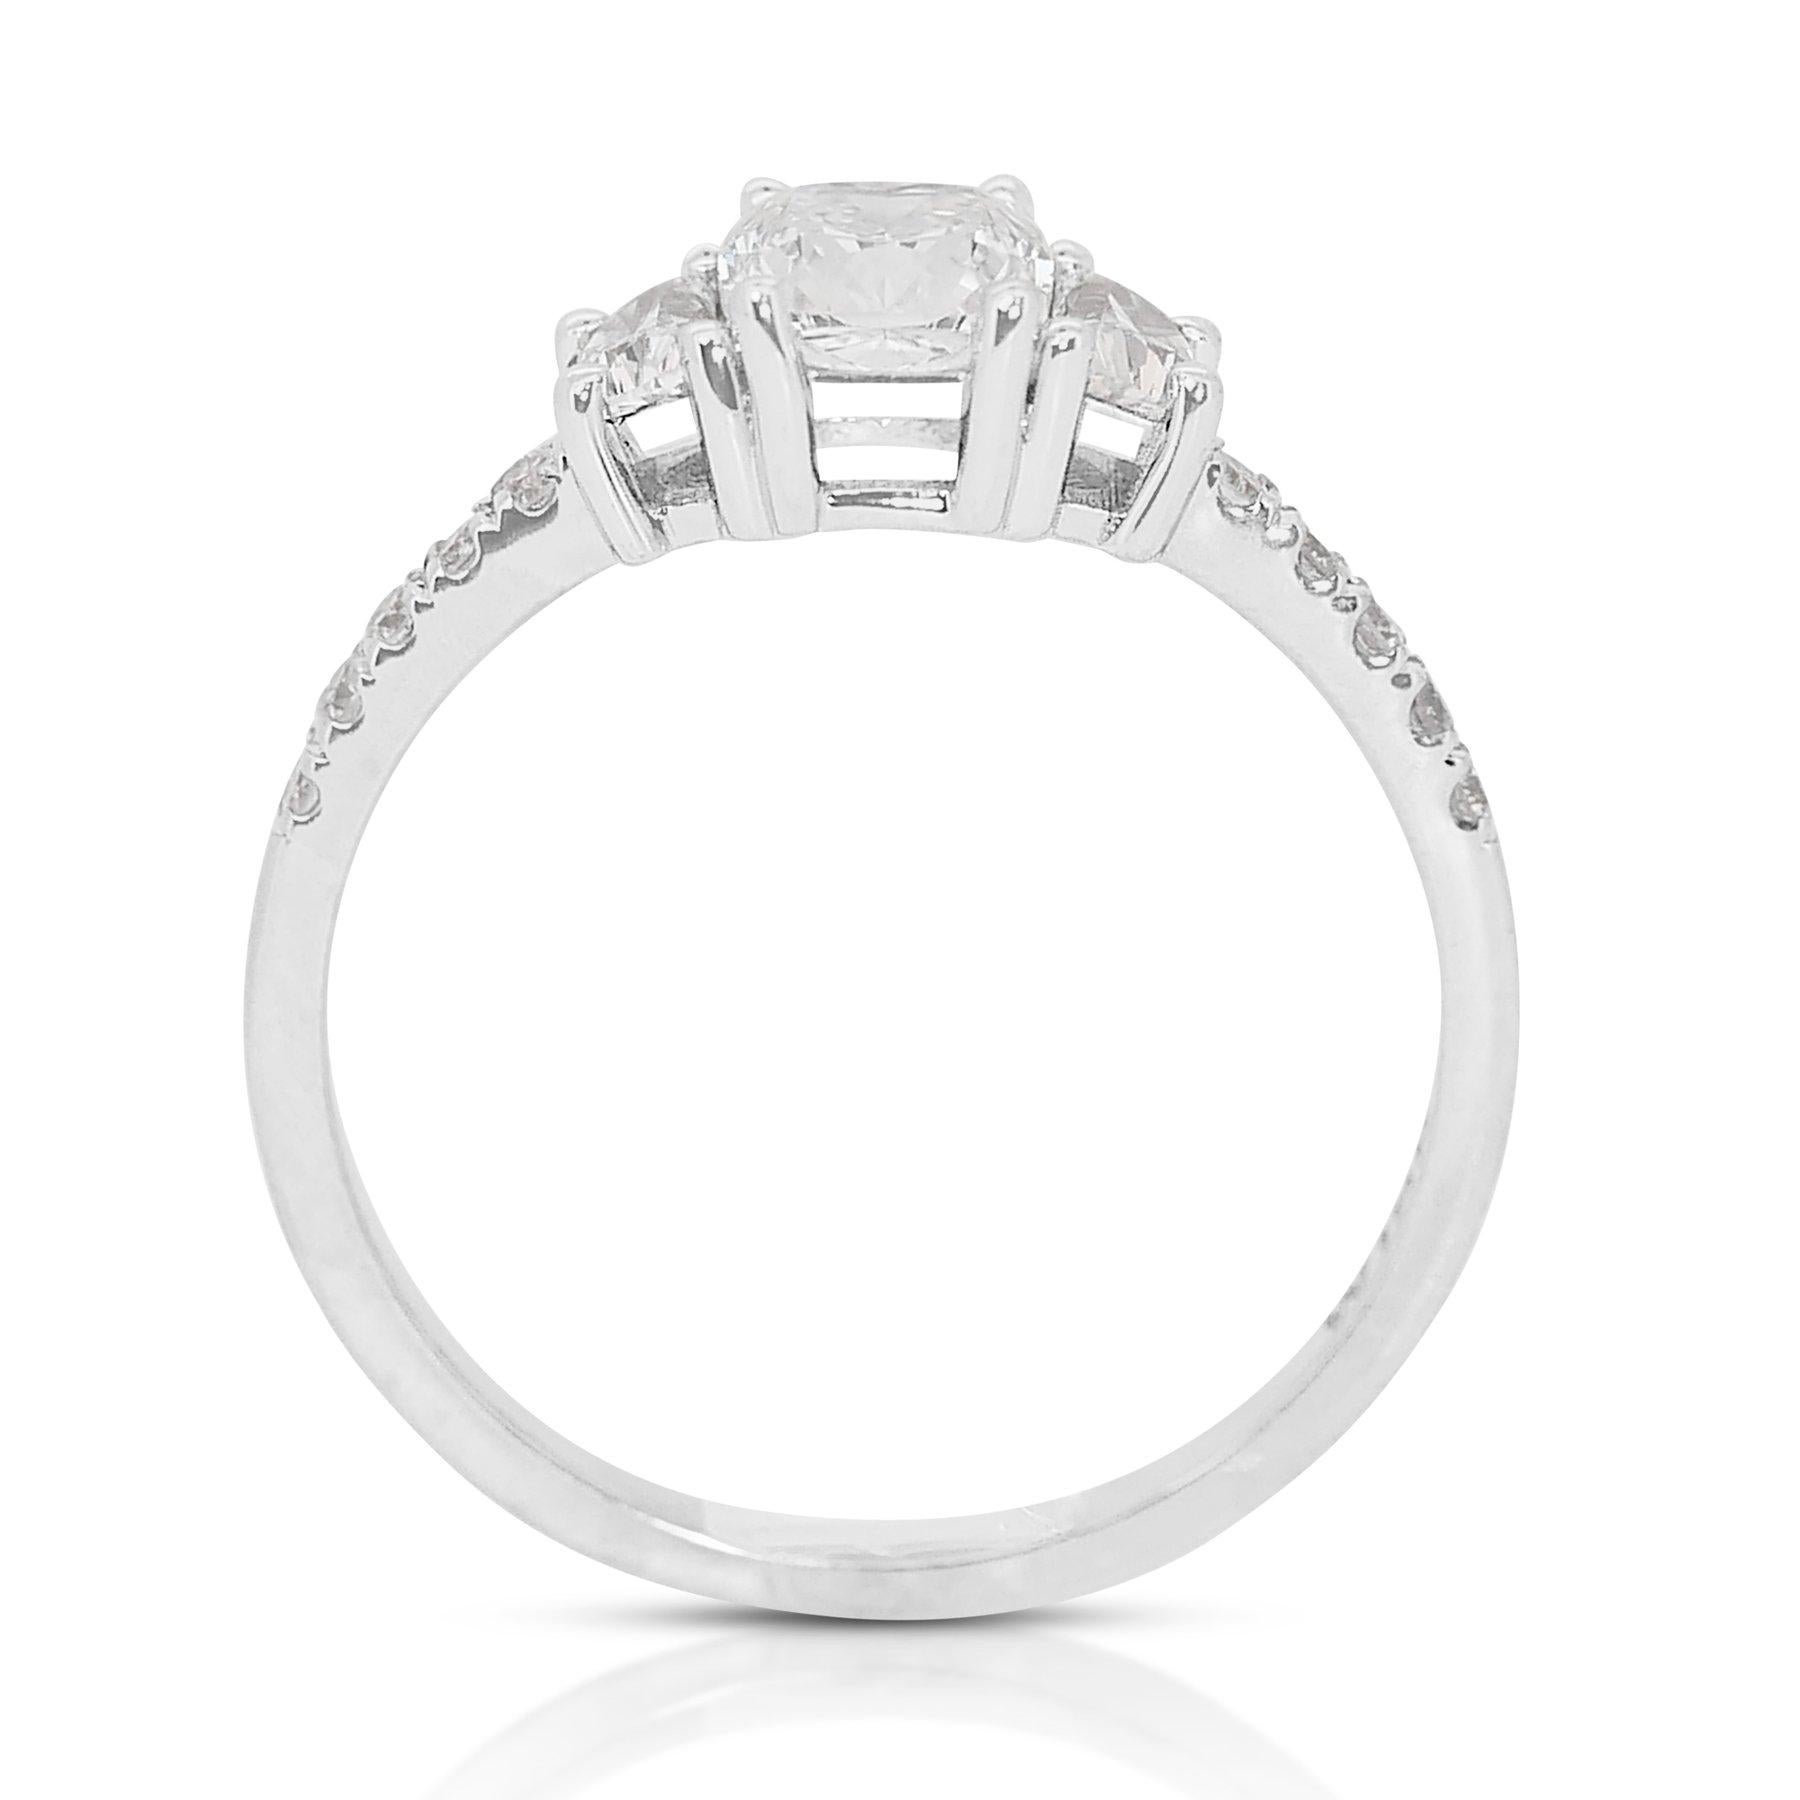 Dazzling 1.40ct Diamonds 3-Stone Ring in 18k White Gold - GIA Certified For Sale 2